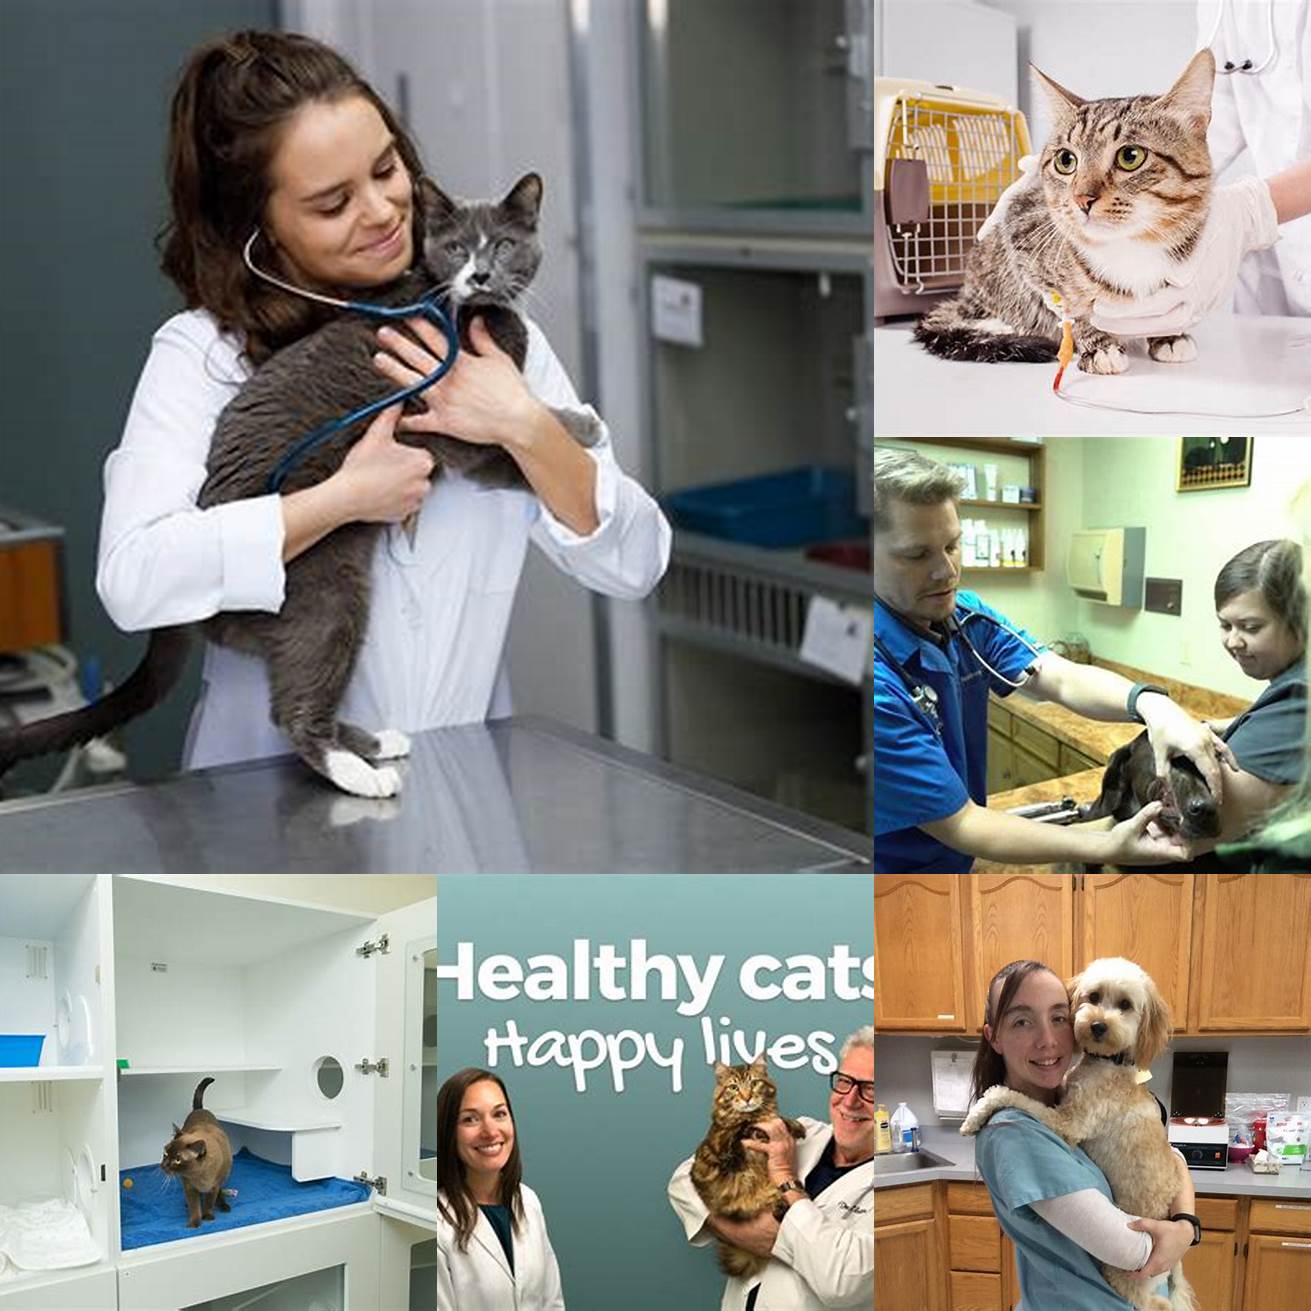 The team at the Cat Hospital of Collin County provides compassionate care that is tailored to each individual cats needs